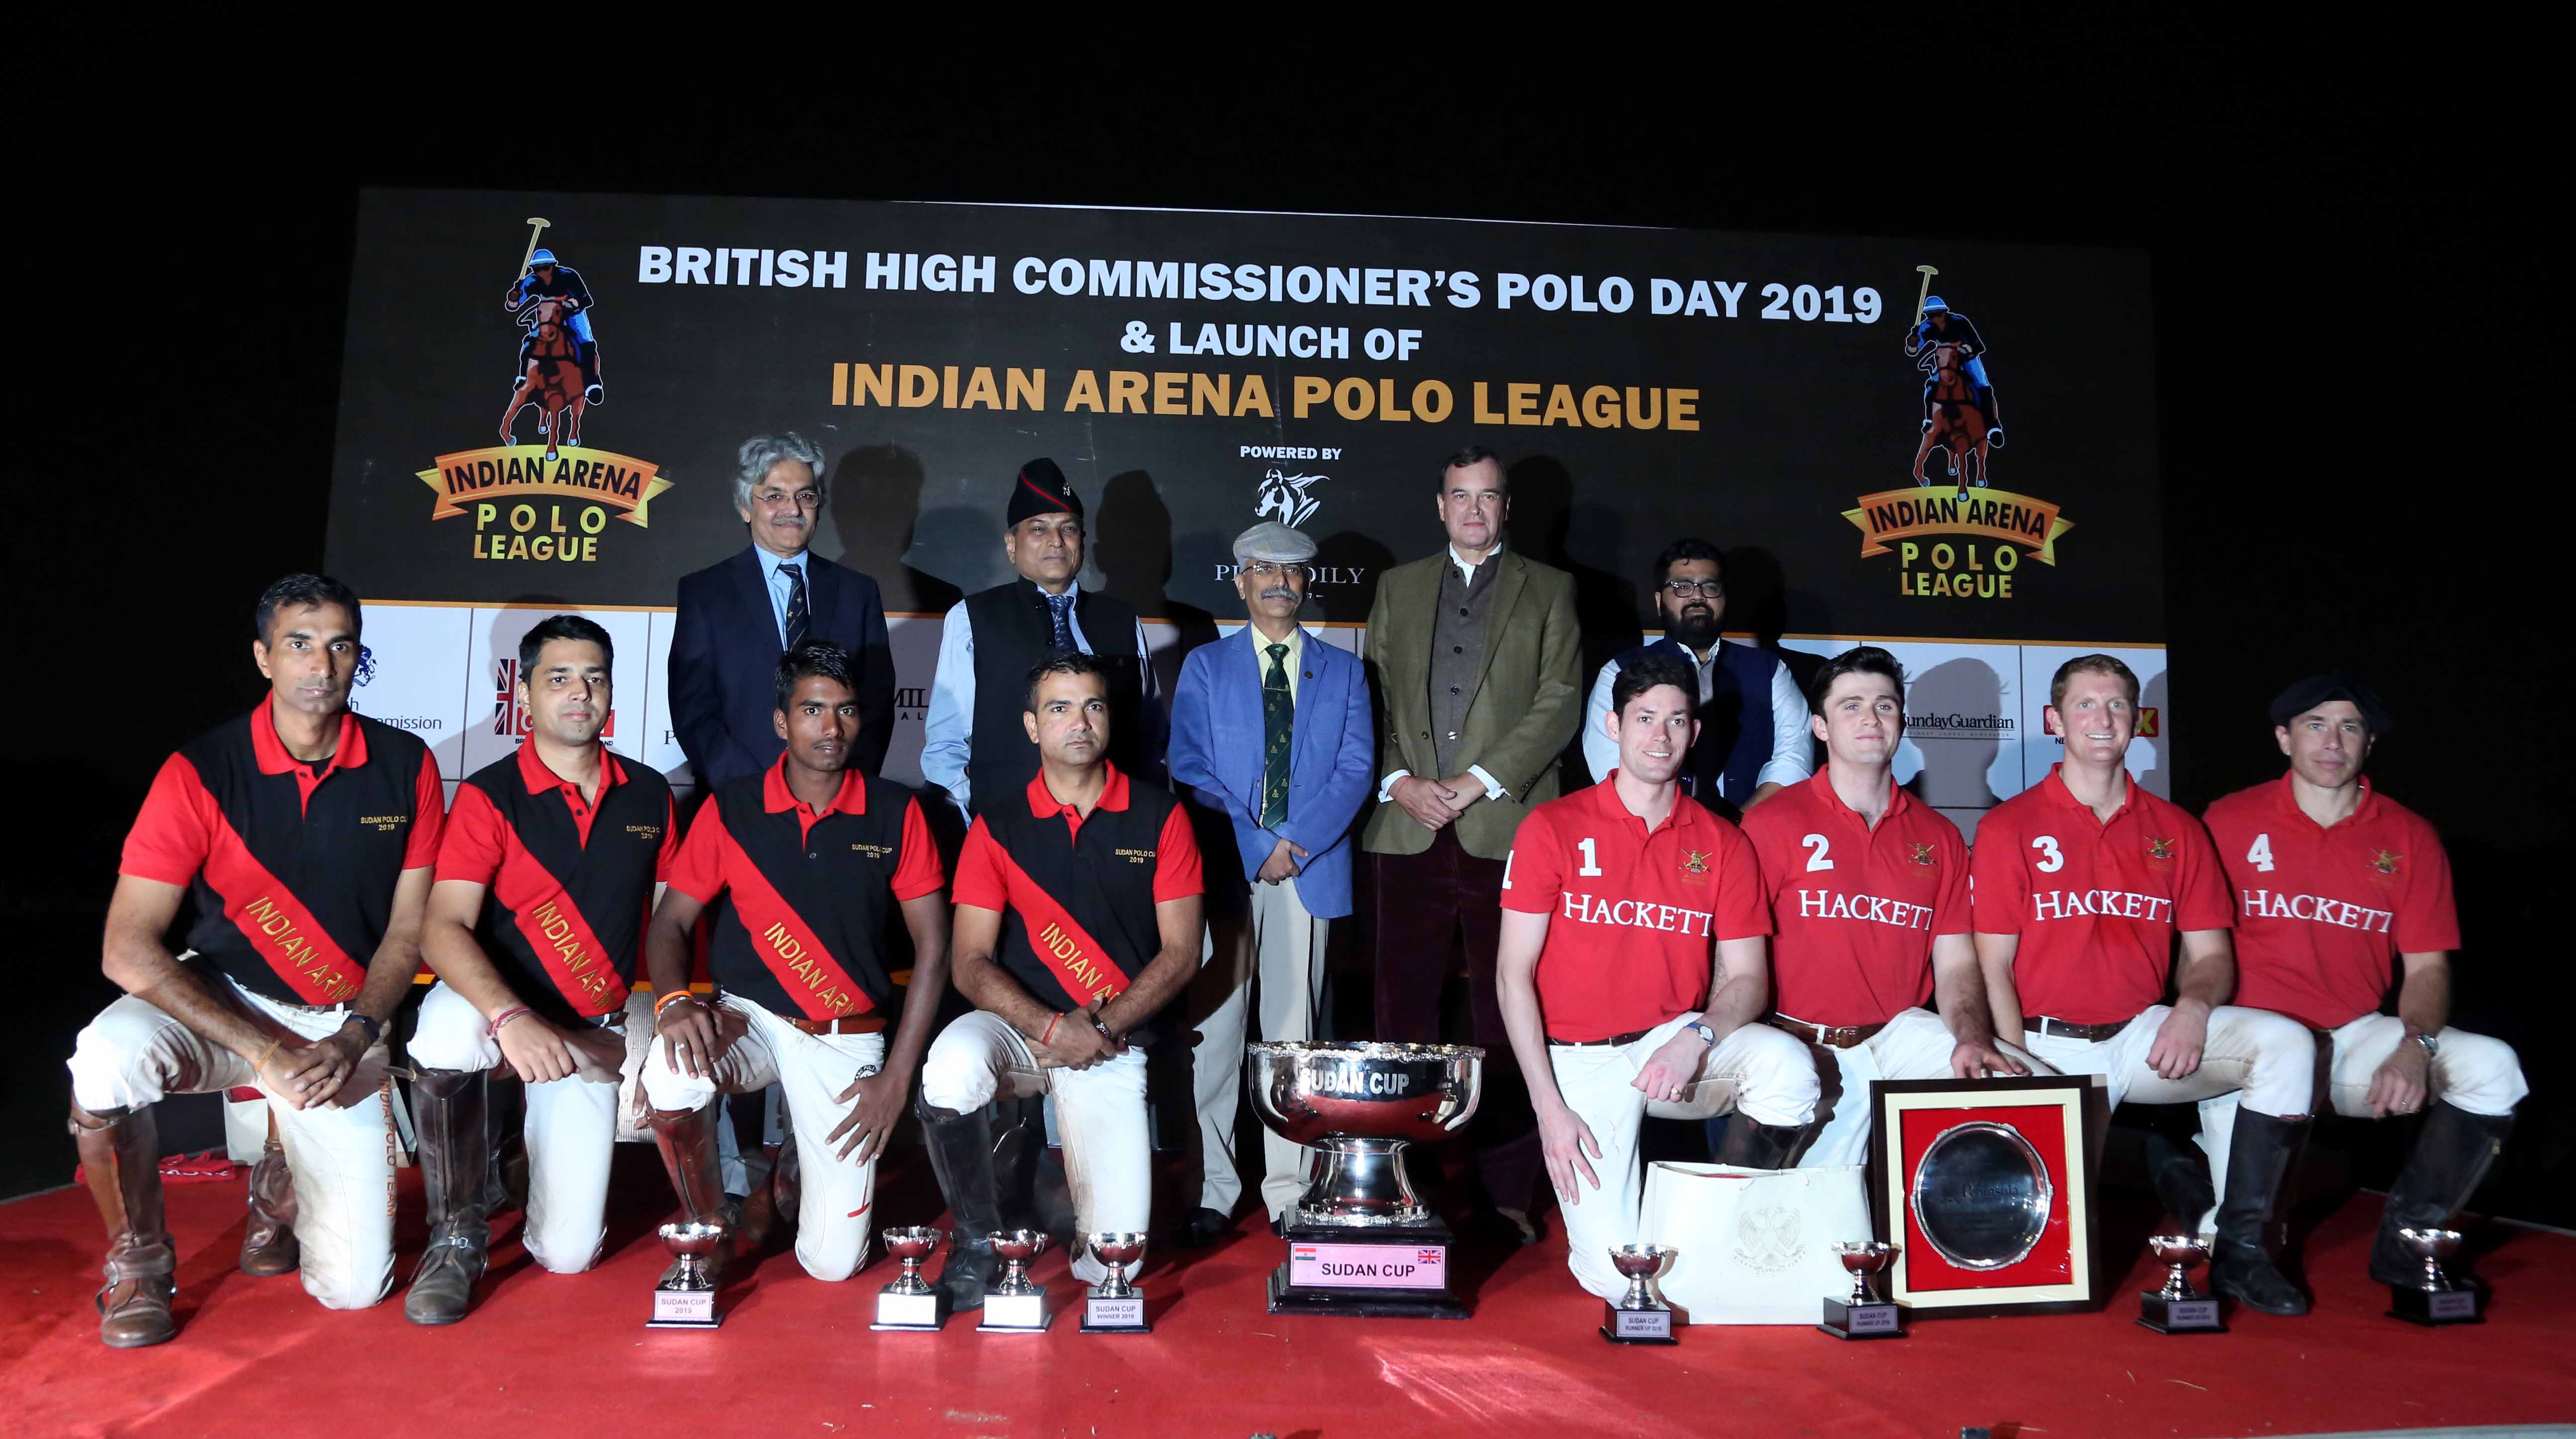 Winner of Sudan Cup - Indian Army Polo Team with Runner up Hackett British Army Polo Team